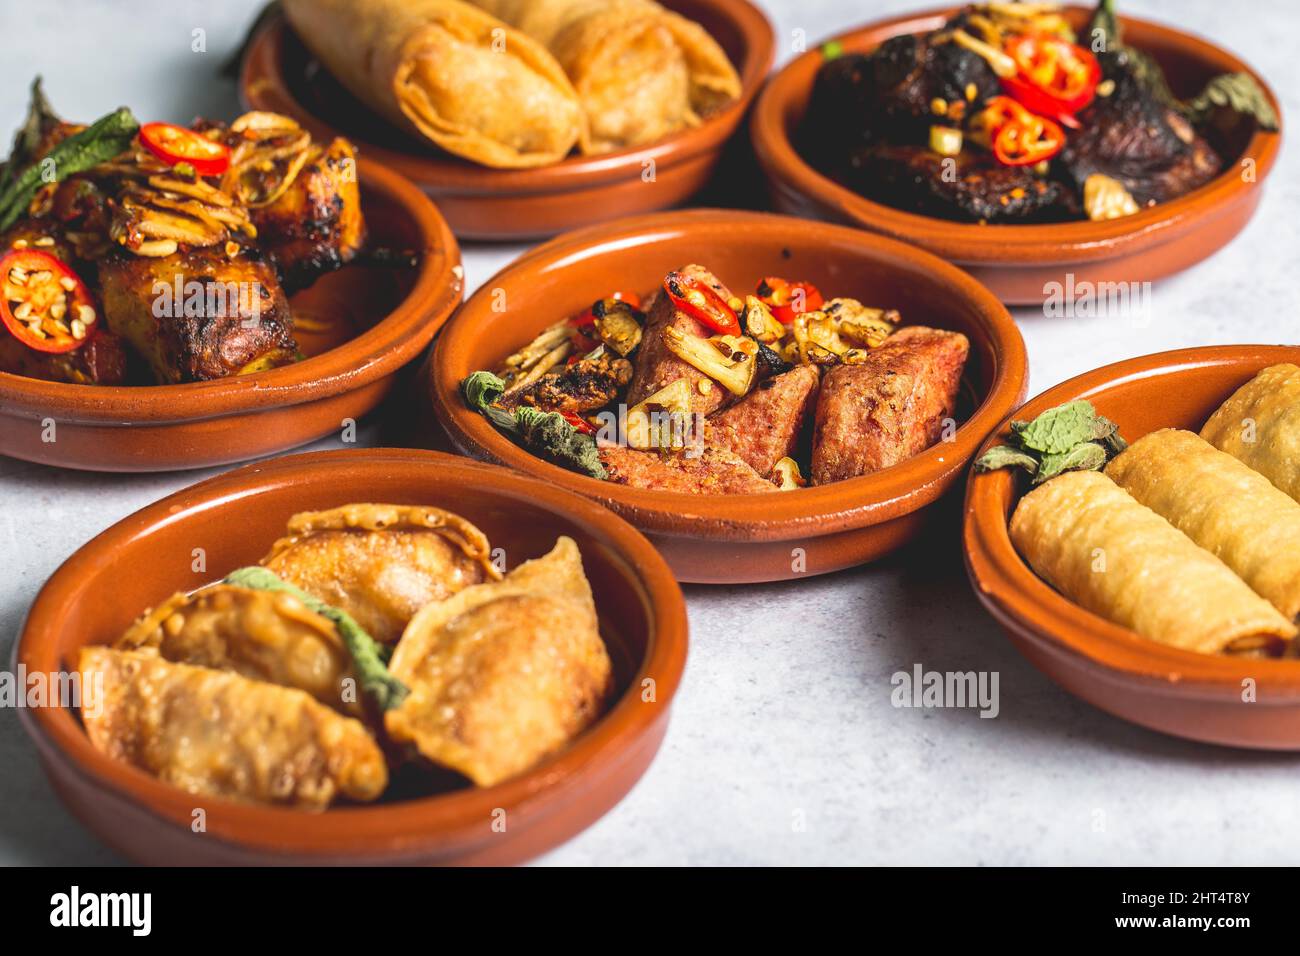 An assortment of tasty and appetizing dishes in clay bowls Stock Photo